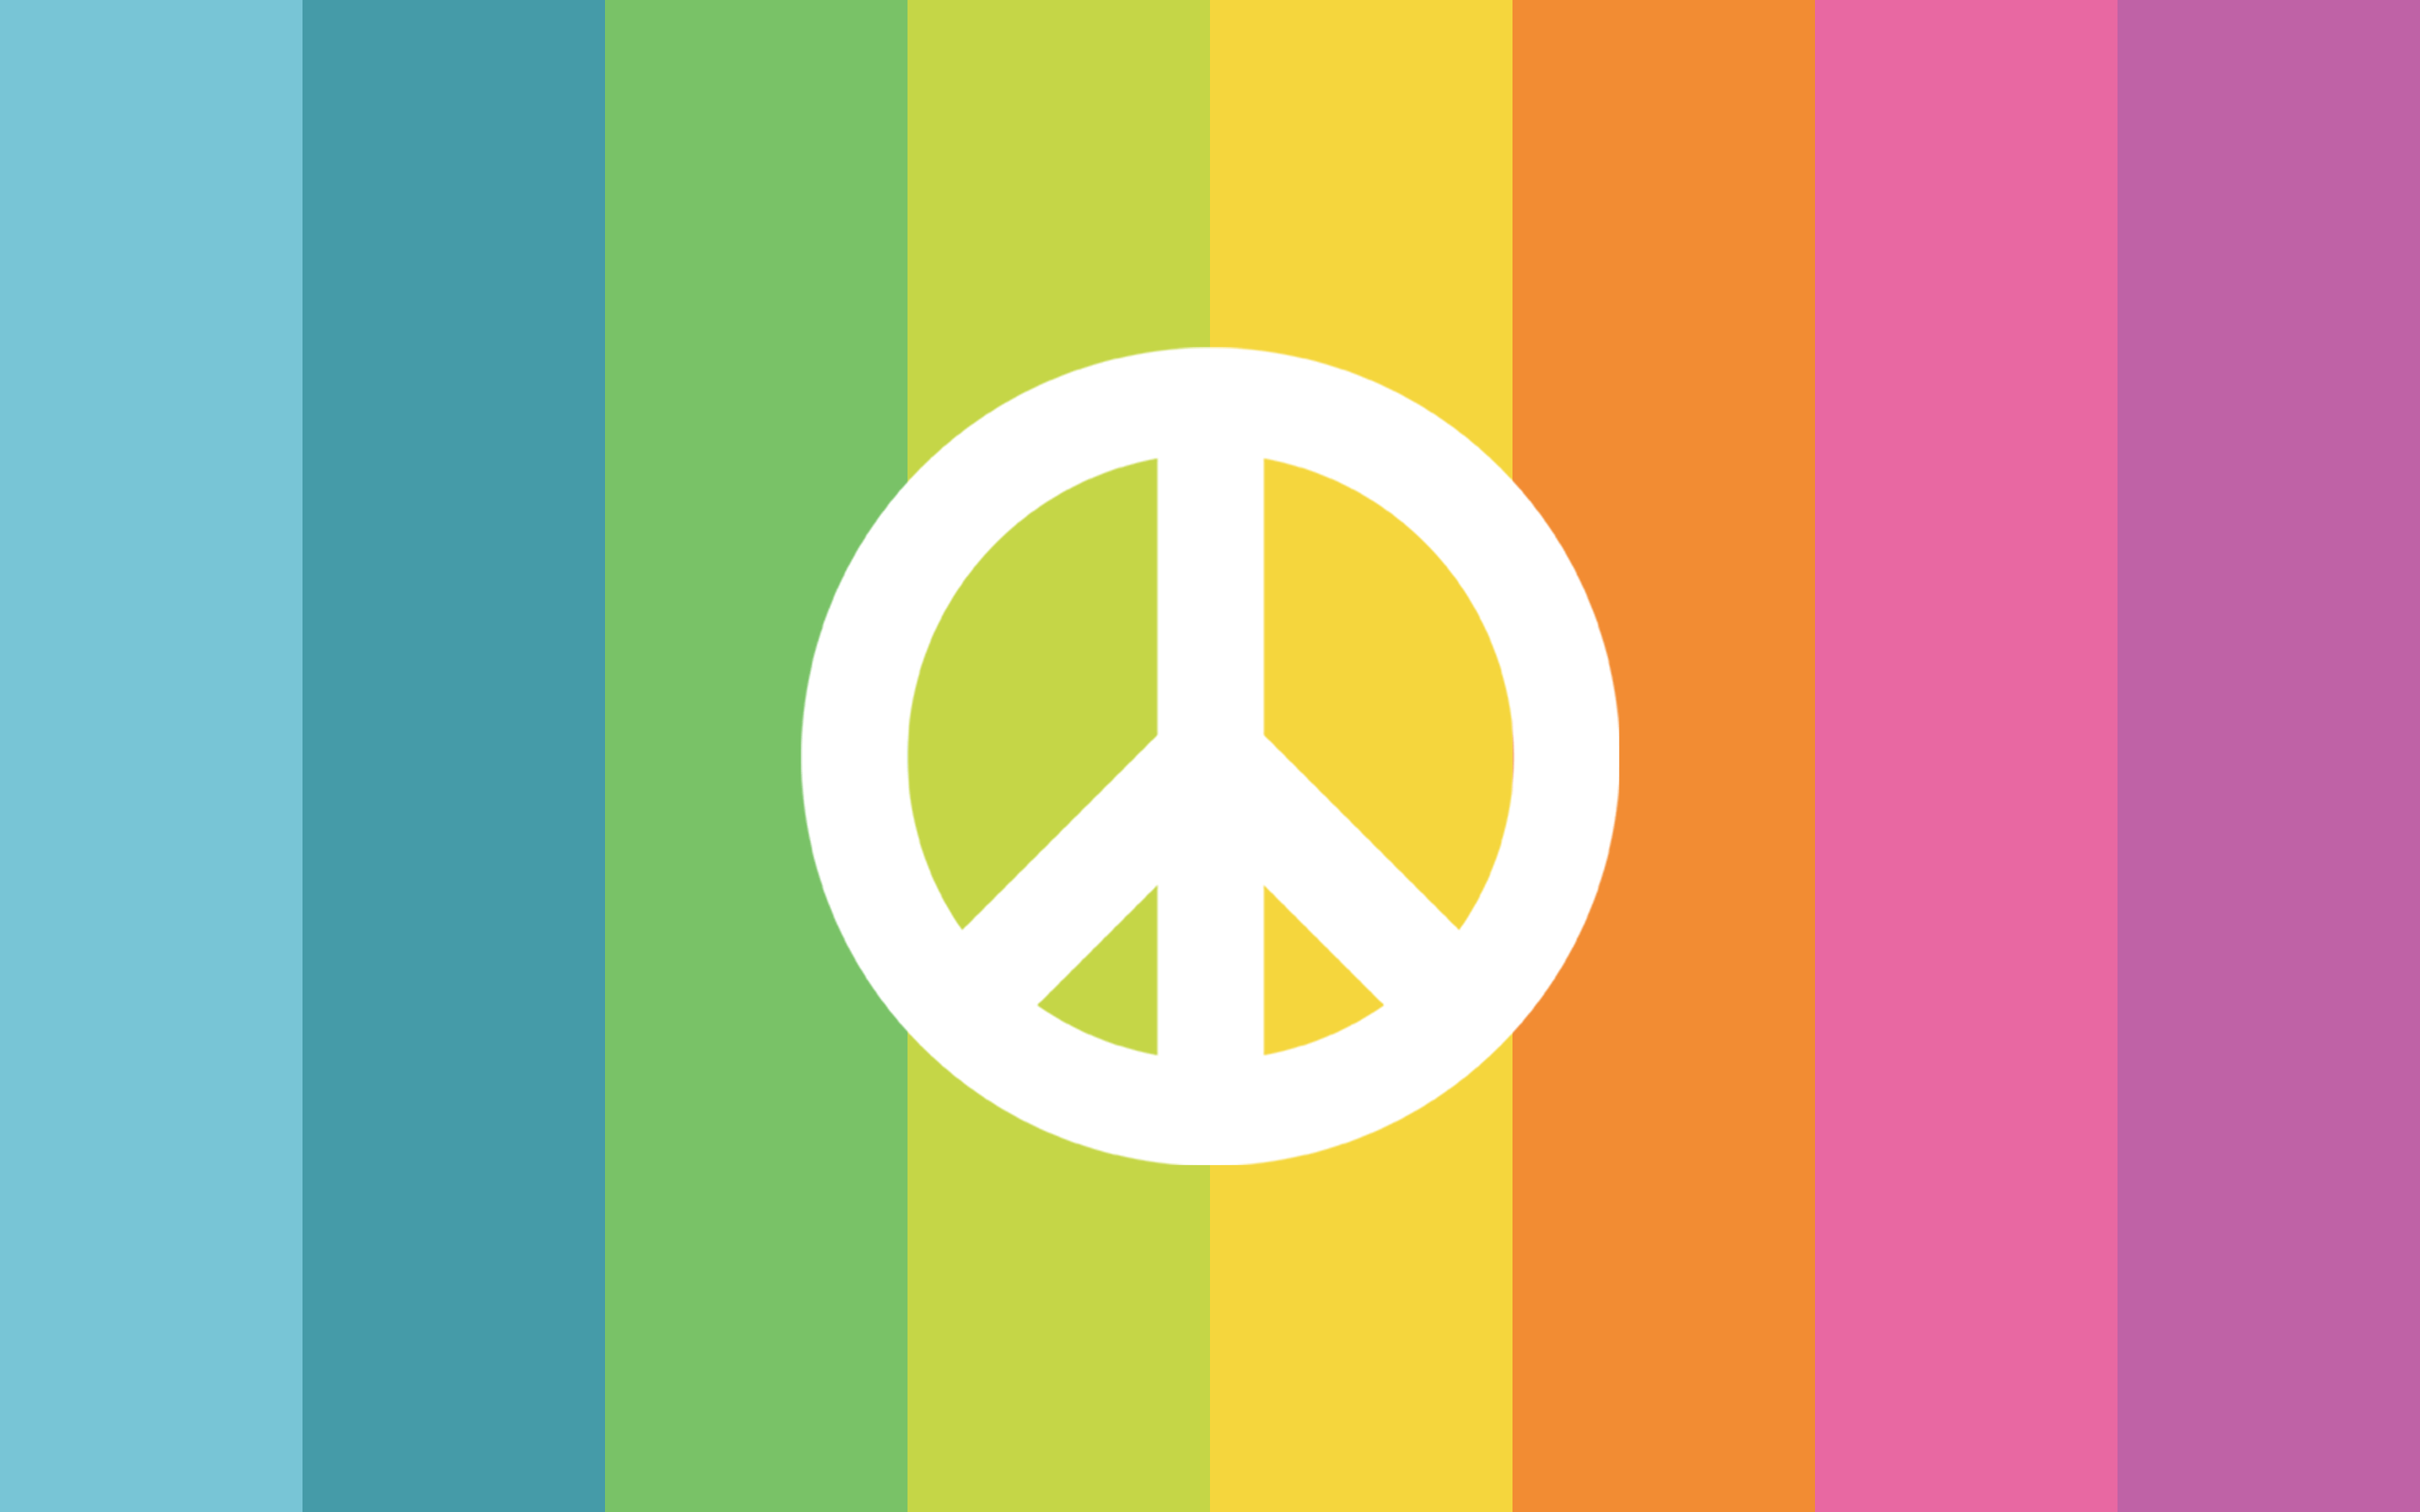 Peace Sign Wallpaper 7935 2560x1600 px